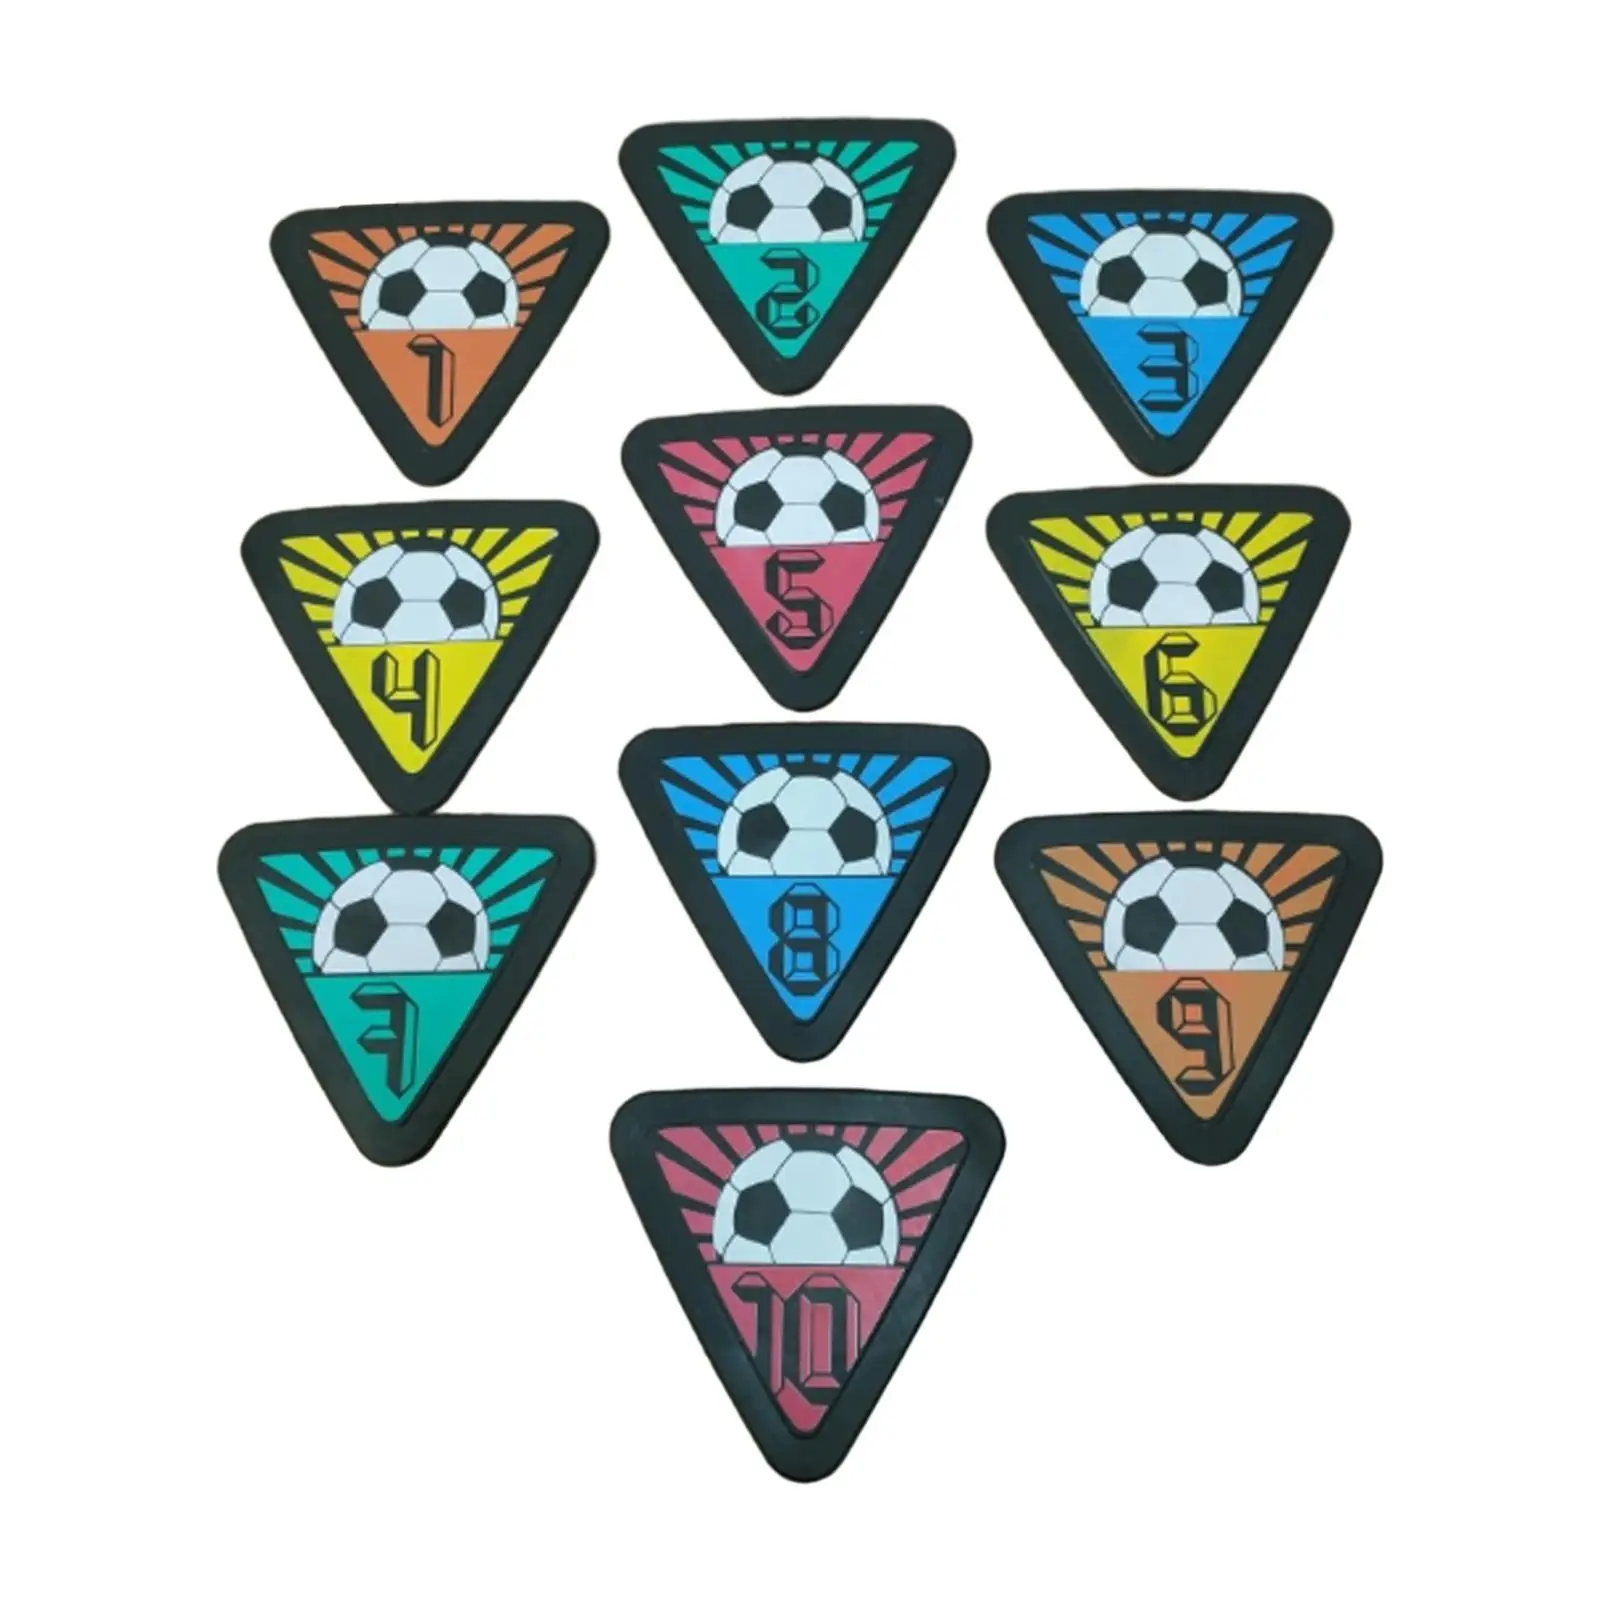 10Pcs Numbered Floor Spot Markers Skill Training Mat Playing Field Marking Non Slip Flat Disc Markers for Indoor Outdoor